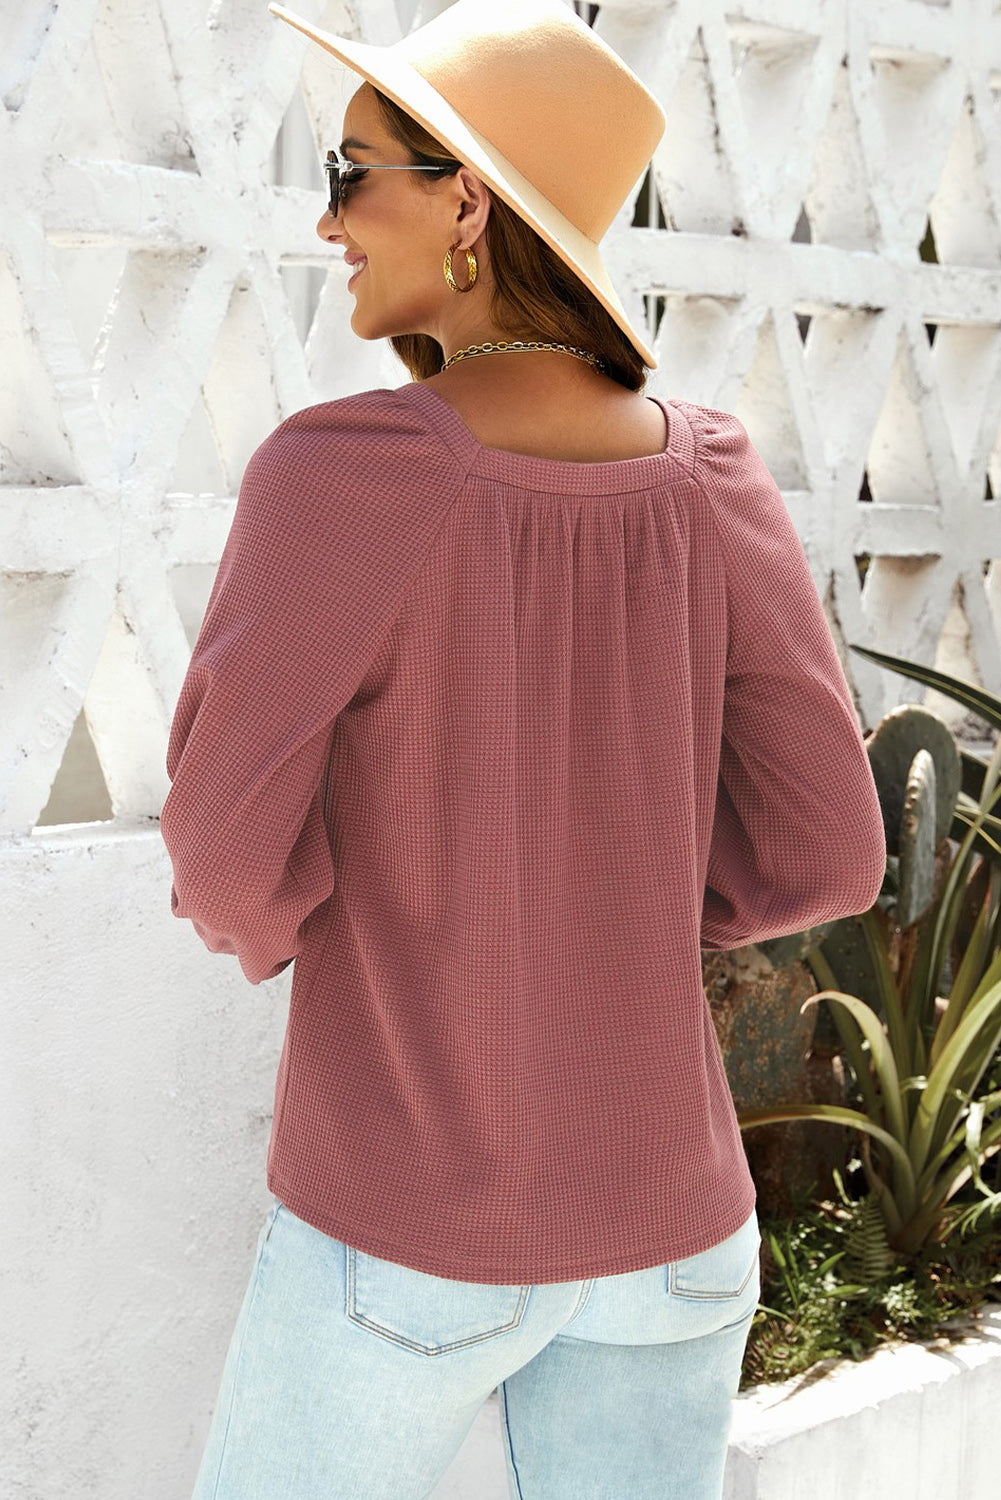 Women's Pink Waffle Texture Casual Square Neck Pullover Top